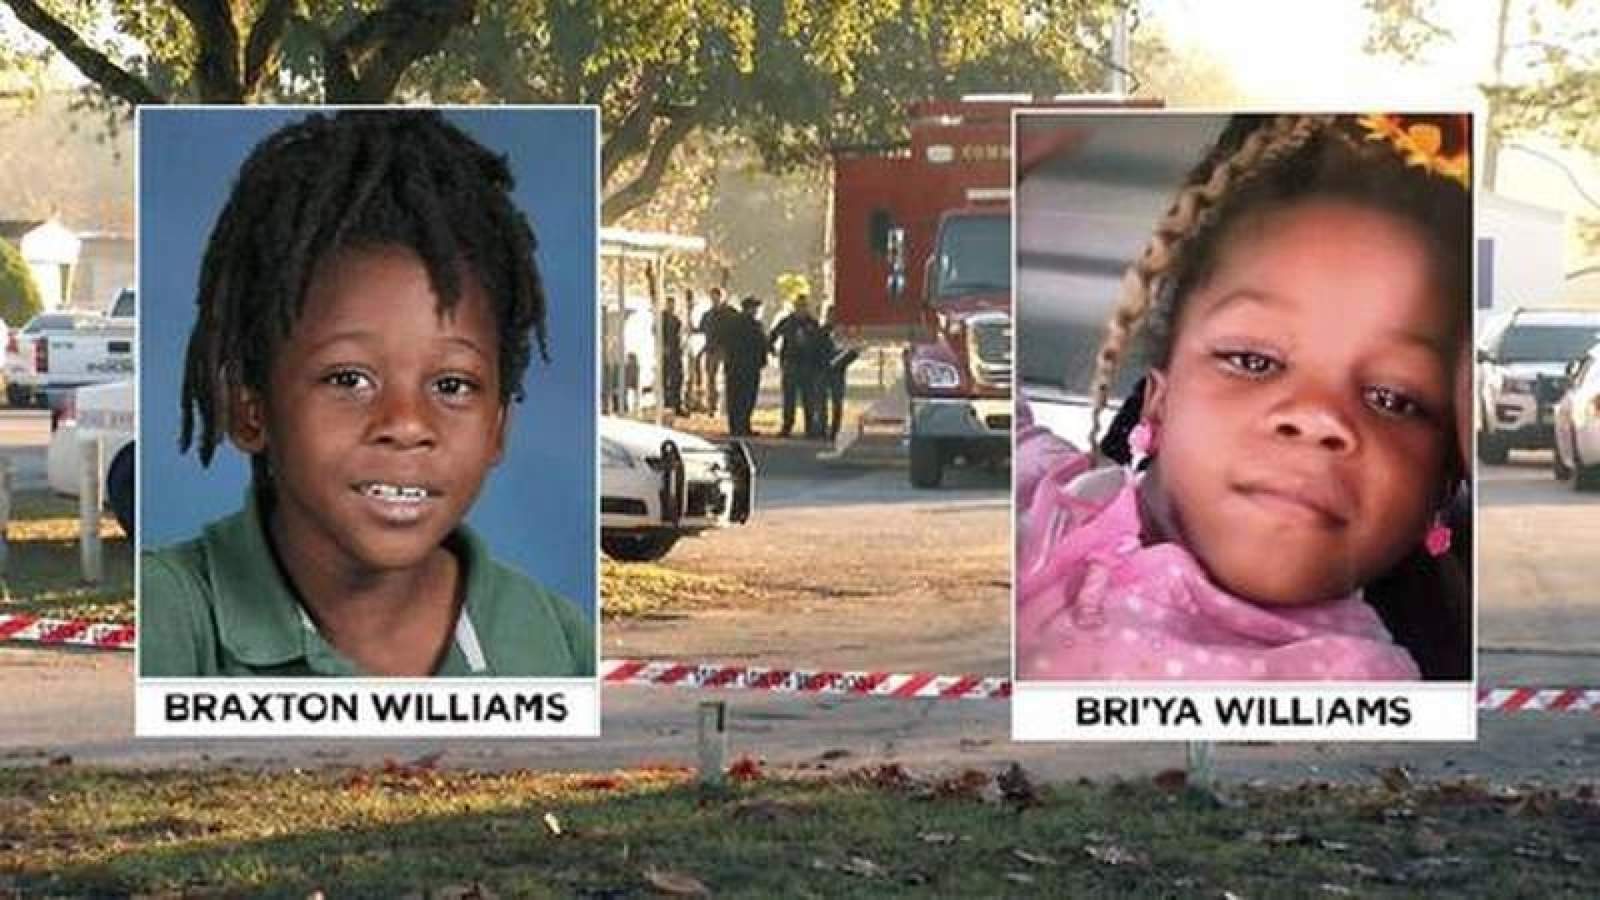 Sheriff: ‘We have found nothing’ in search for 2 children